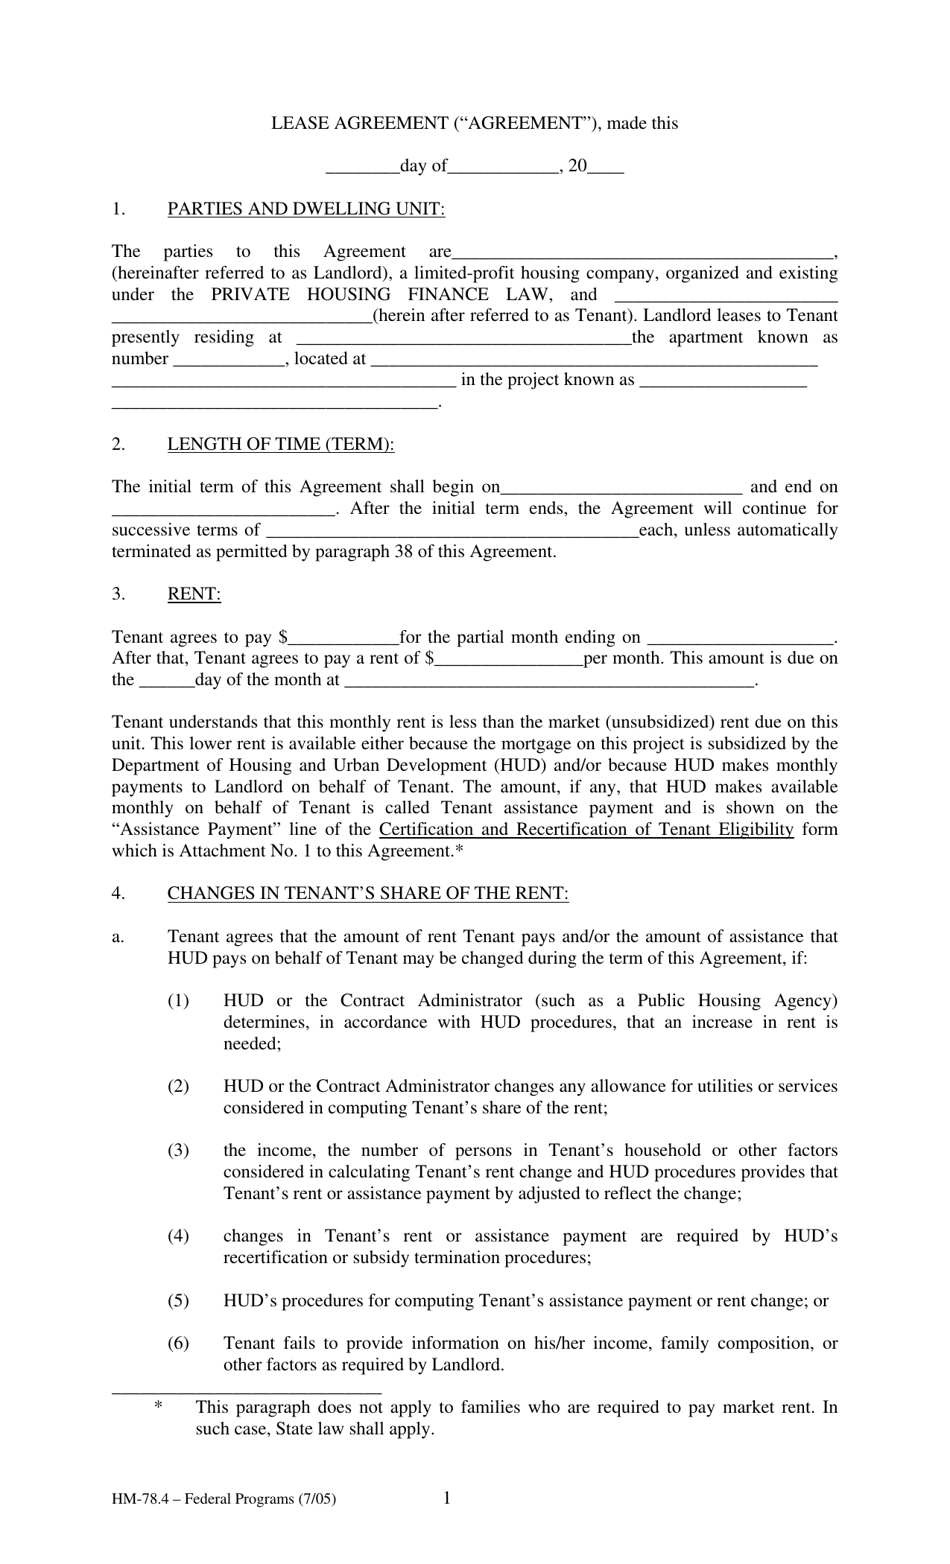 Form HM-78.4 Agreement of Lease, Federal Programs - New York, Page 1